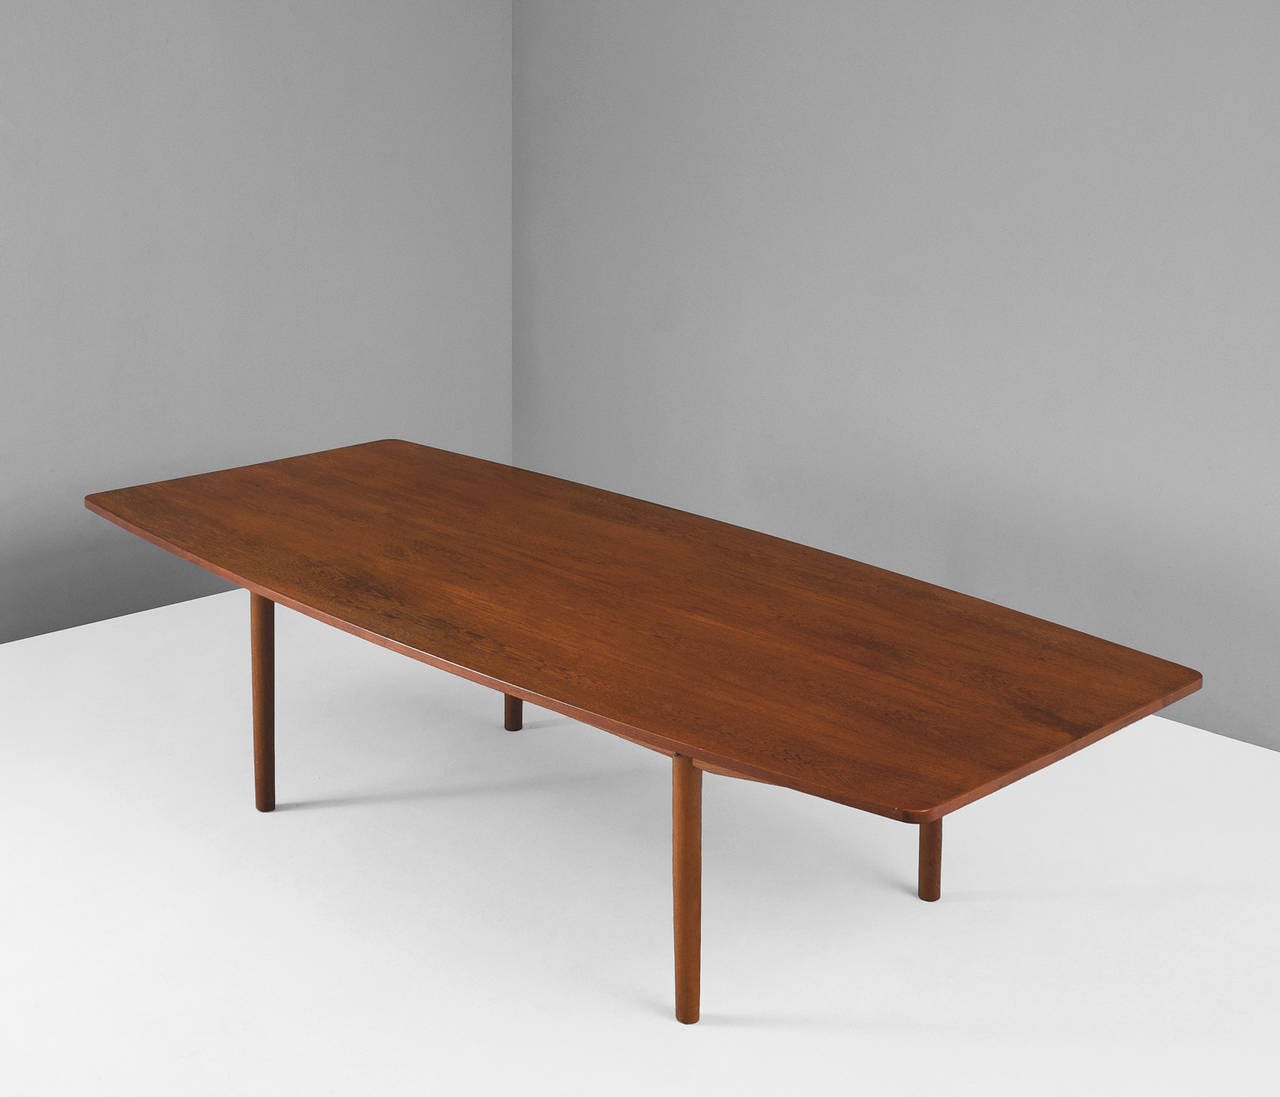 Very large 'boat / barrel' shaped teak dining/conference table from Scandinavian origin.

This table with a slightly bend top and rounded edges has a very nice warm beautiful grain in the veneer which has a very nice expression. Accompanied by